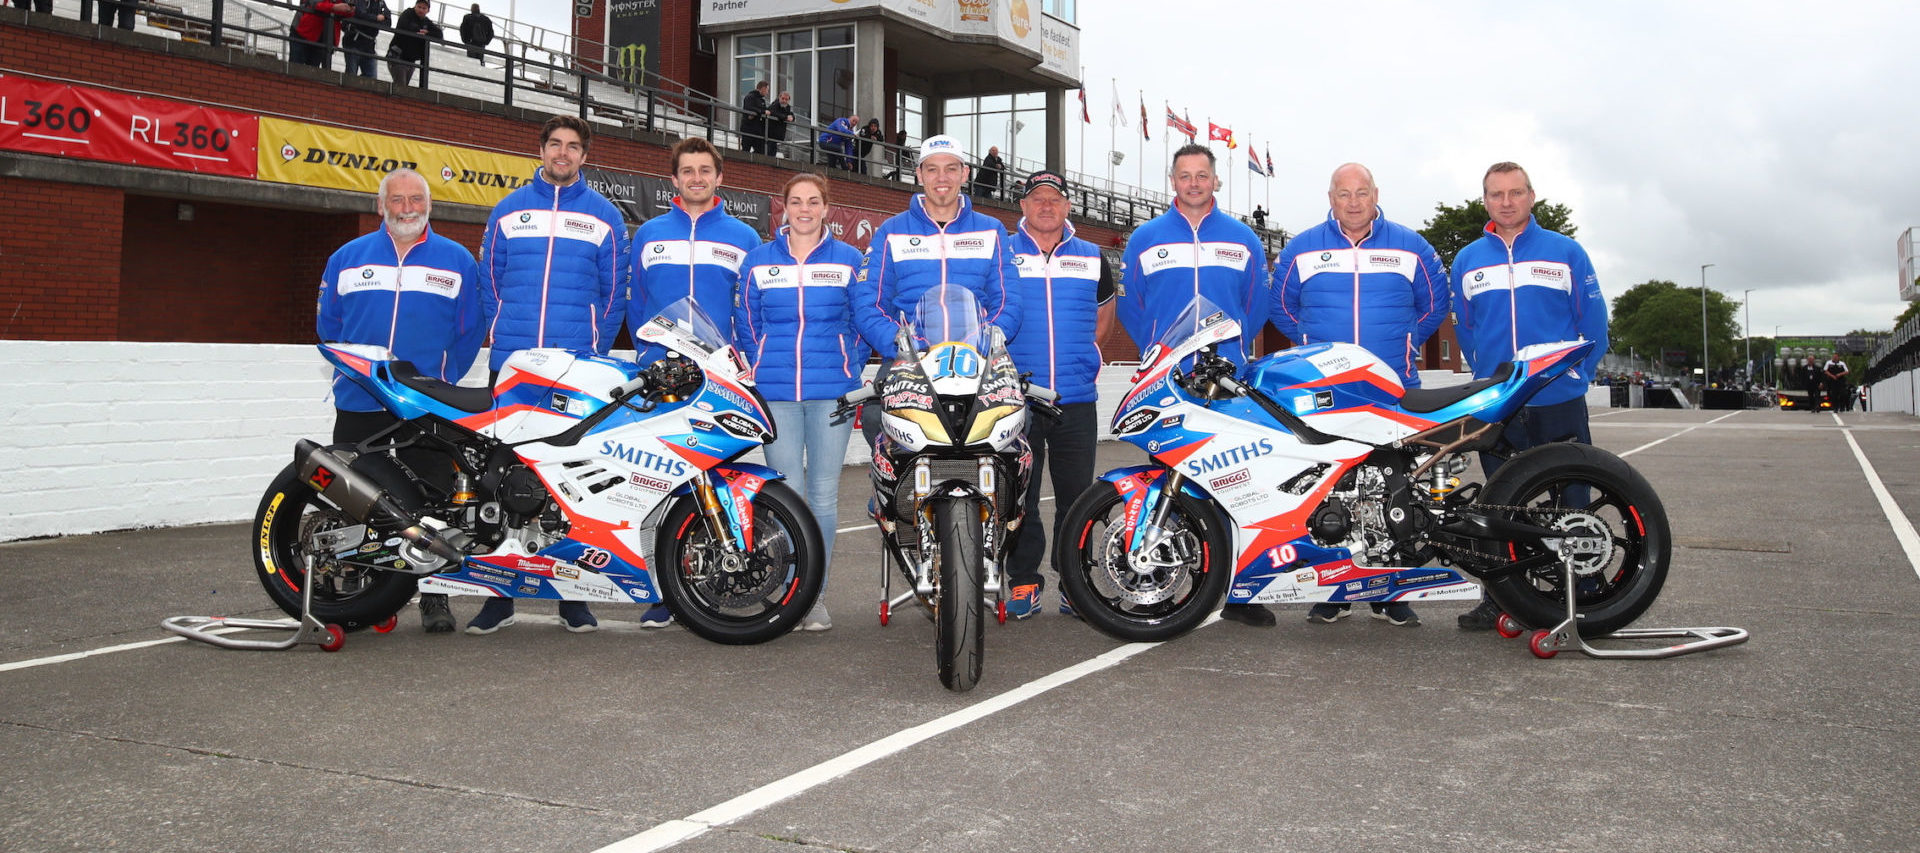 Smiths Racing team at the Isle of Man TT with rider Peter Hickman (center) flanked by Alan Smith (right) and Rebecca Smith (left). Photo courtesy Smiths Racing.